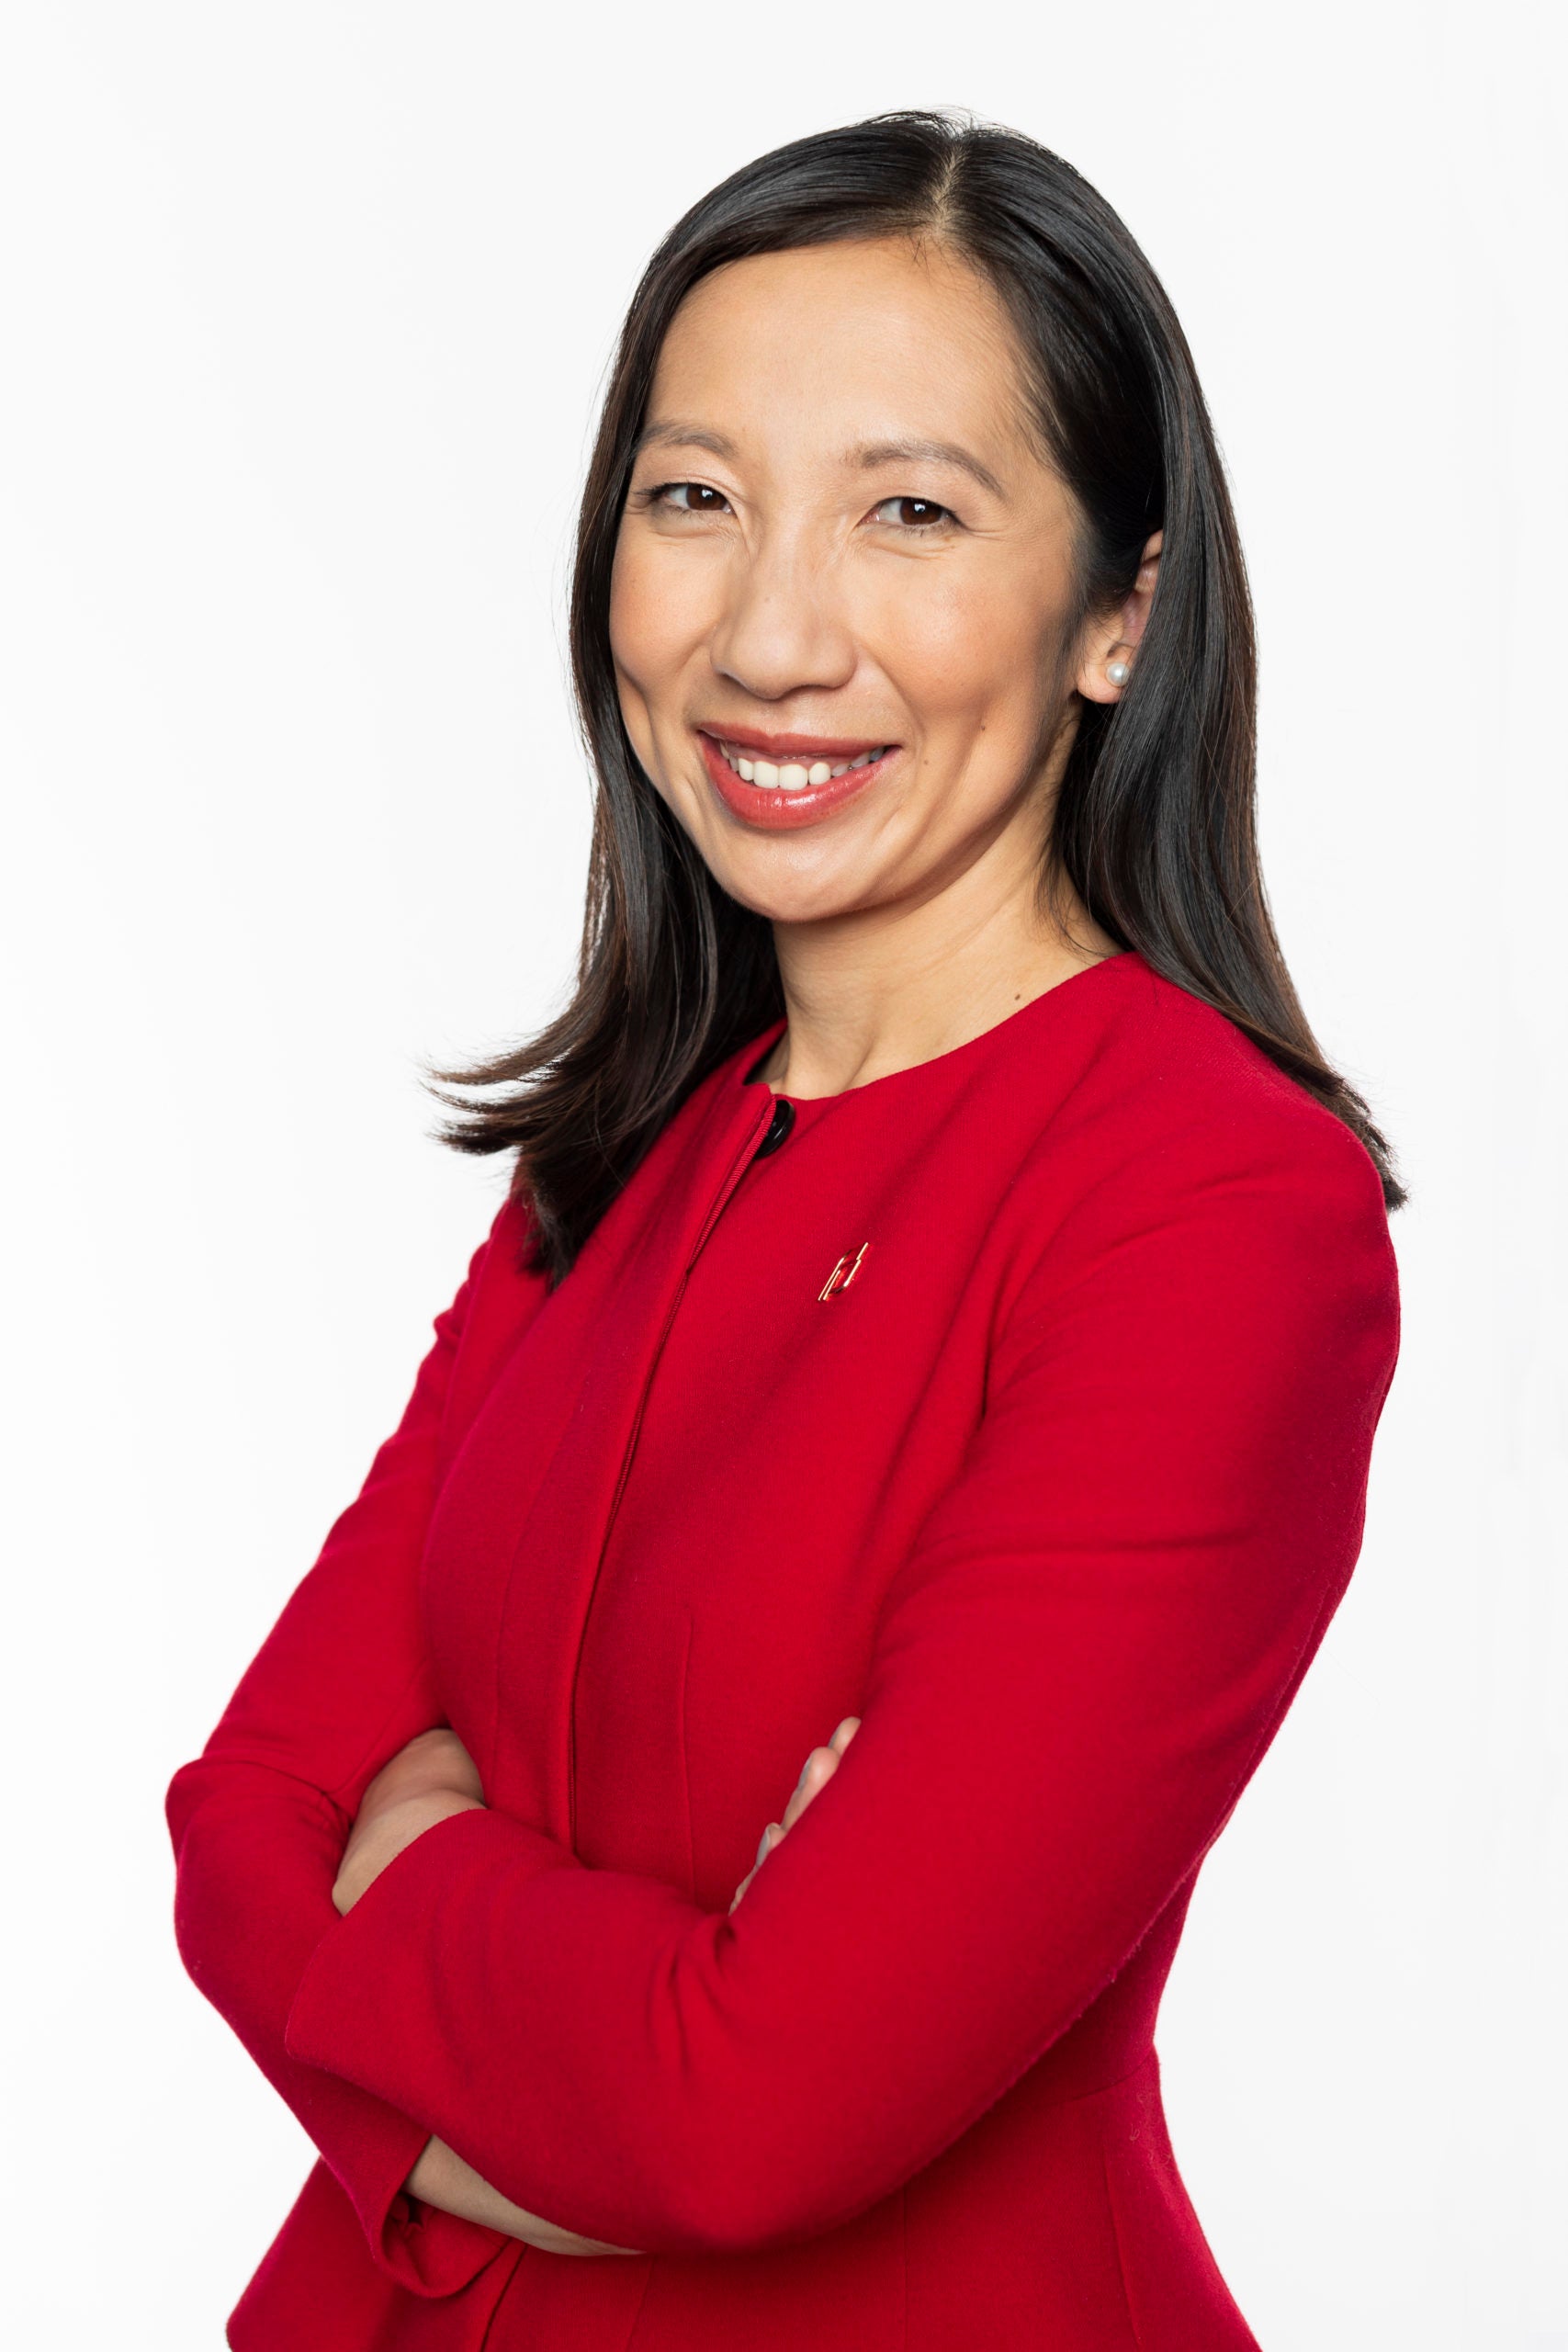 Leana S. Wen, MD, MSc. former President/CEO of the Planned Parenthood Federation of America